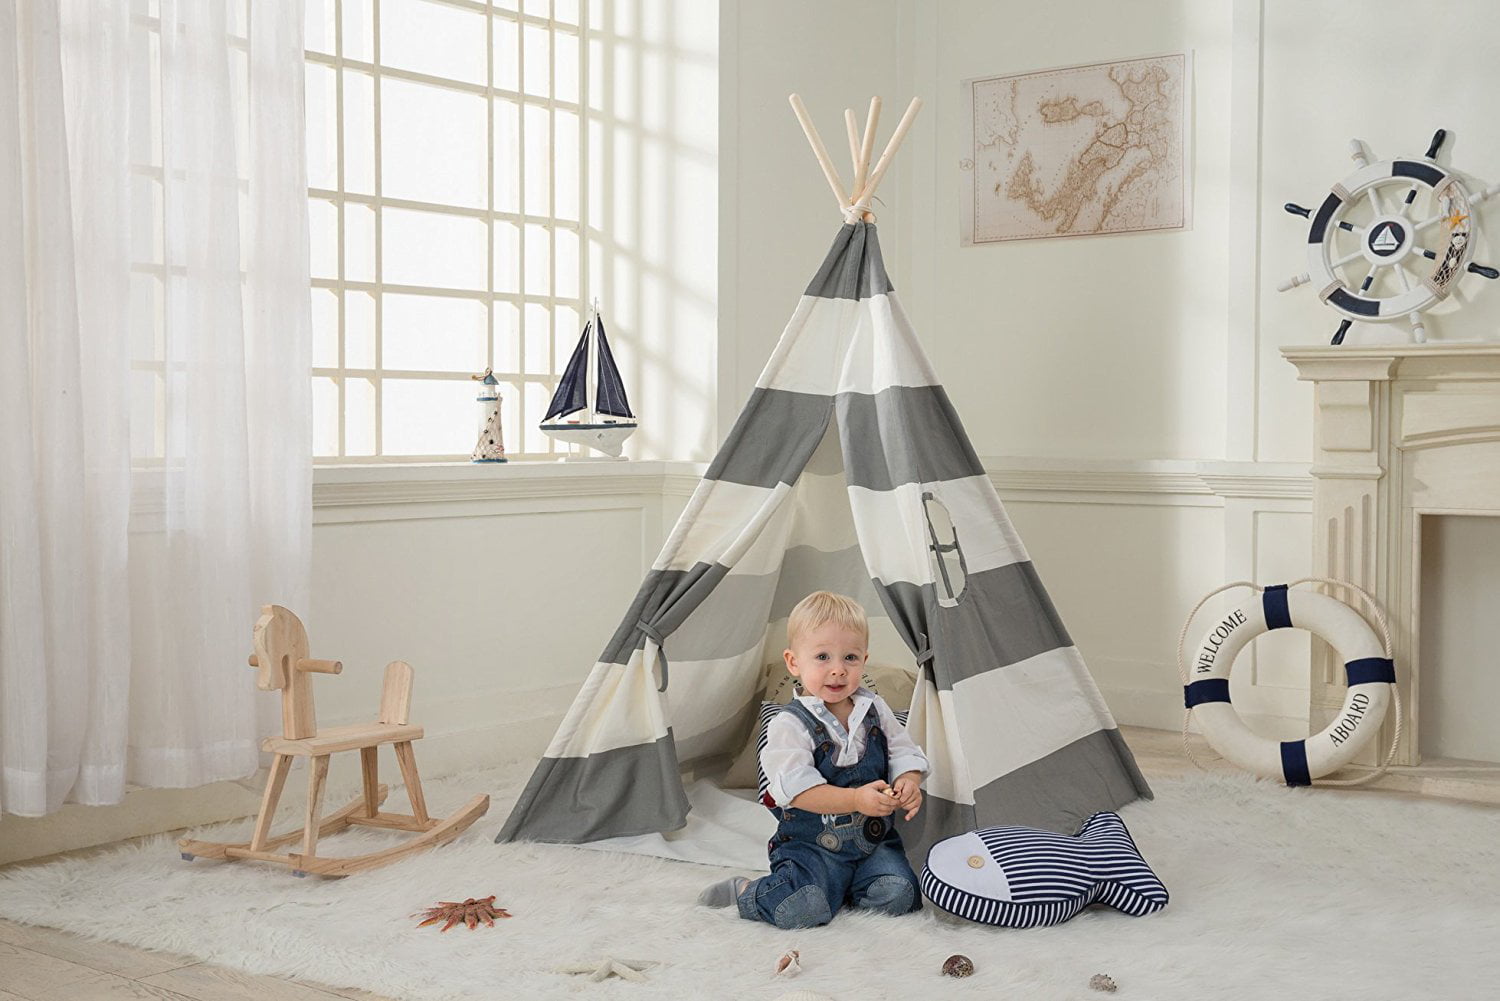 Blue Stripes Hamevik 6' Giant Canvas Kids Indian Play Teepee Indoor Tent 